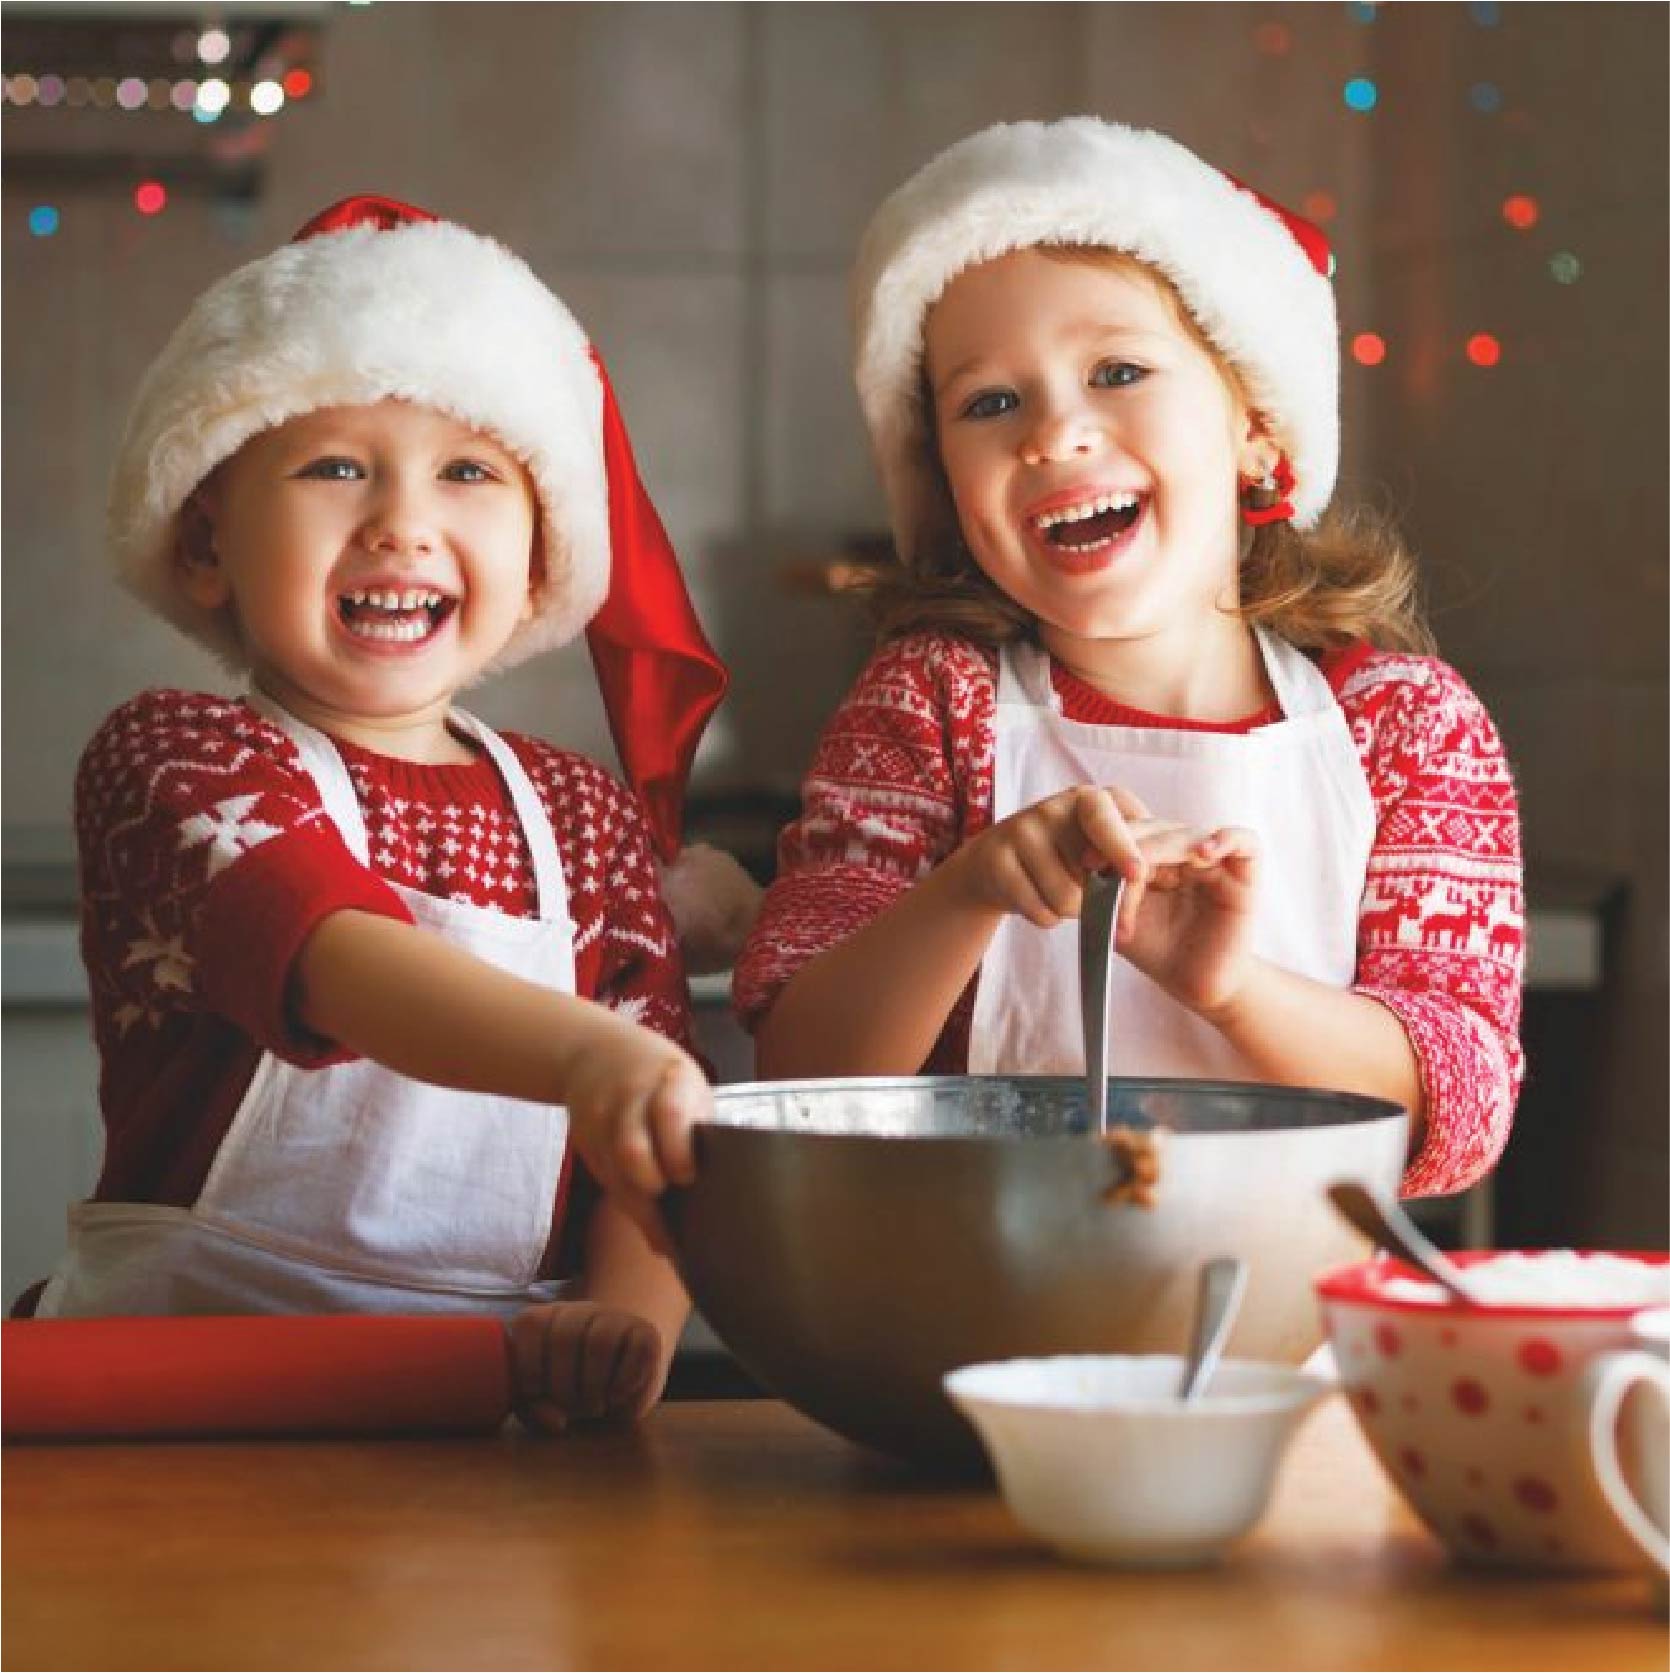 Our Top 5 Christmas Gift Ideas For Kids